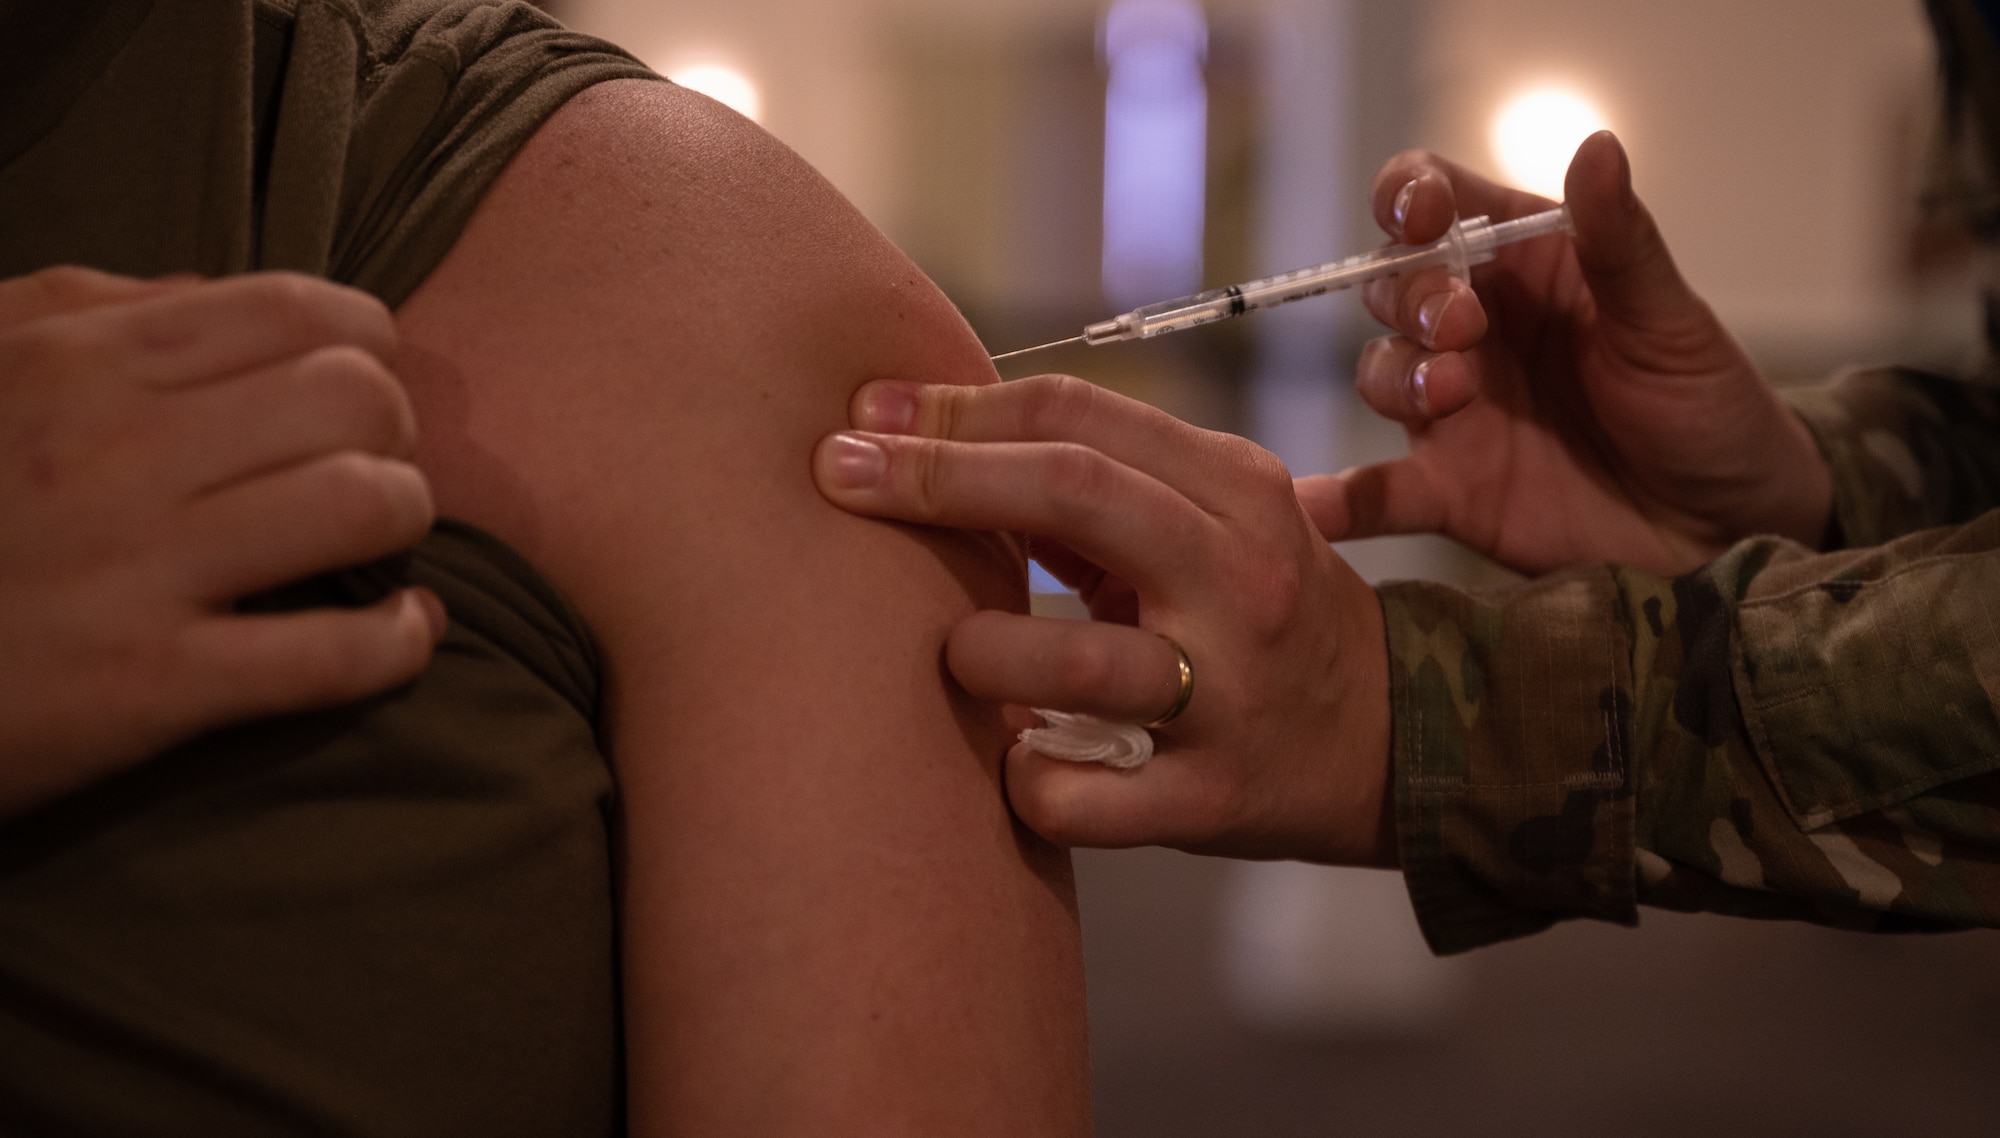 Service members are considered fully vaccinated two weeks after completing the second dose of a two-dose COVID-19 vaccine, or two weeks after receiving a single dose of a one-dose vaccine.